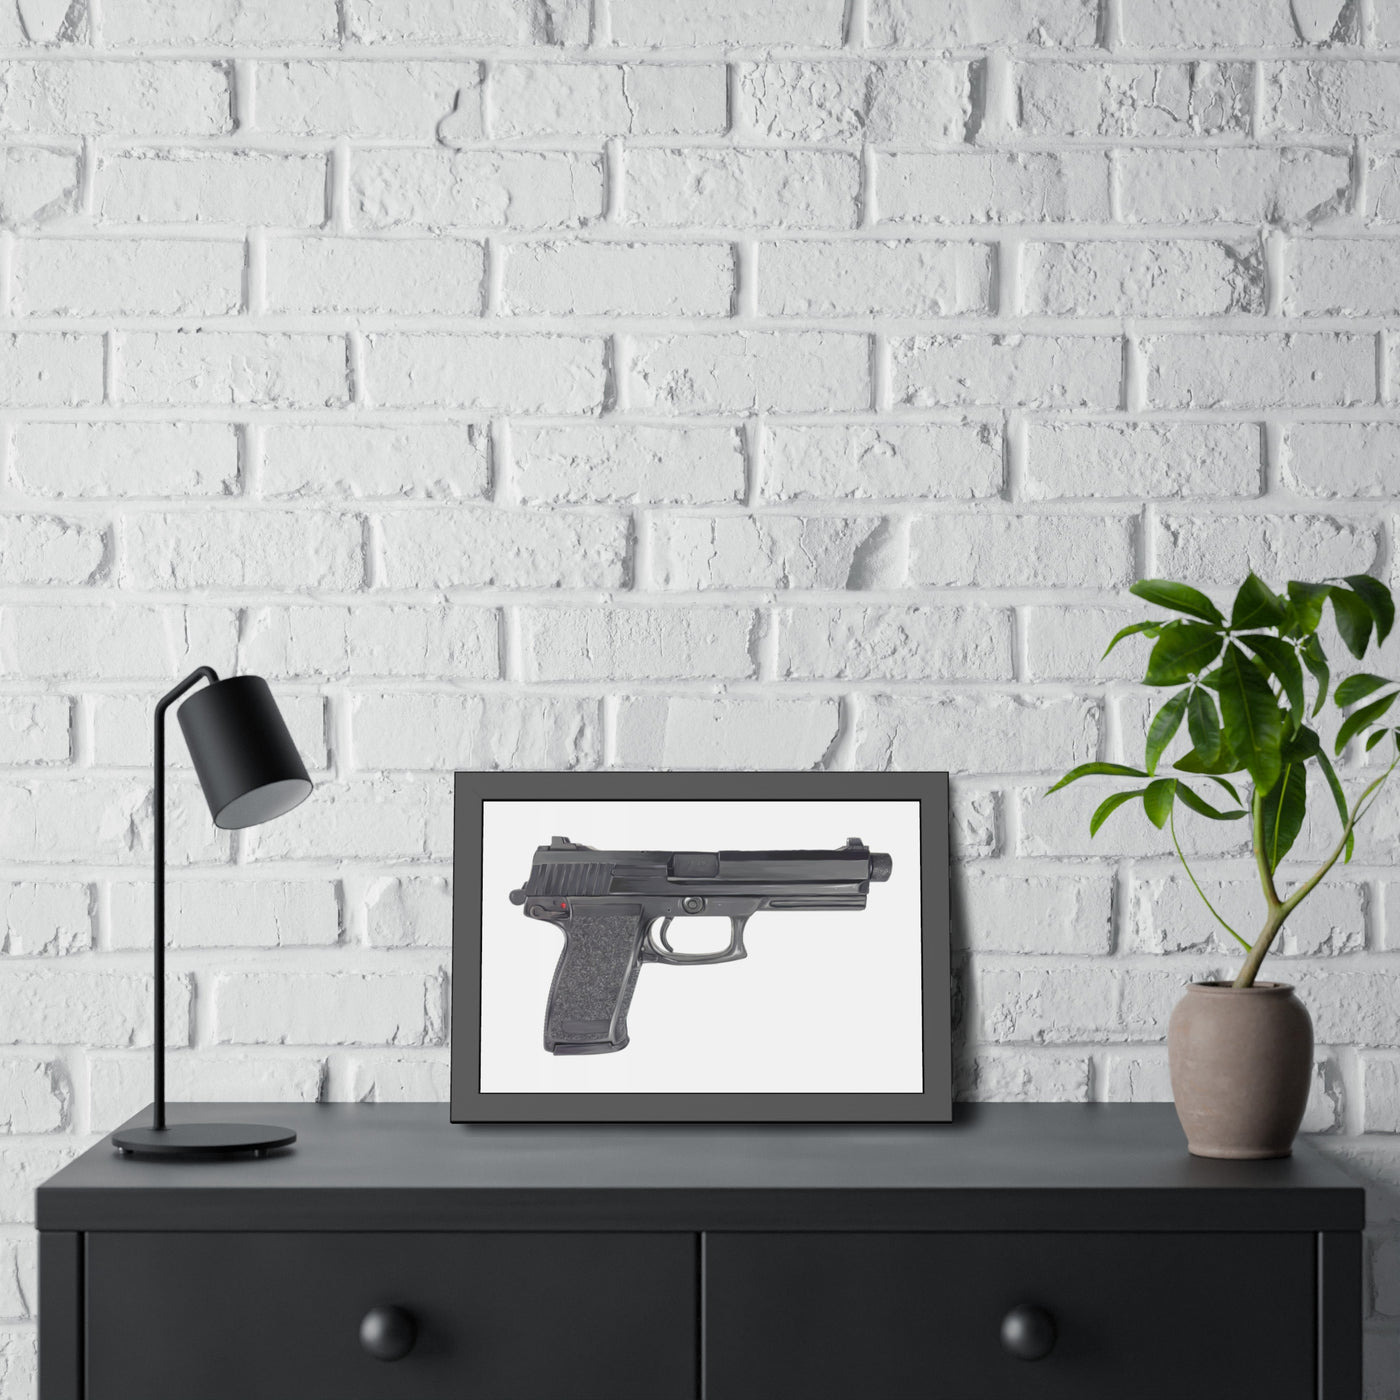 Tactical .45 ACP Poly Pistol Painting - Just The Piece - Black Frame - Value Collection